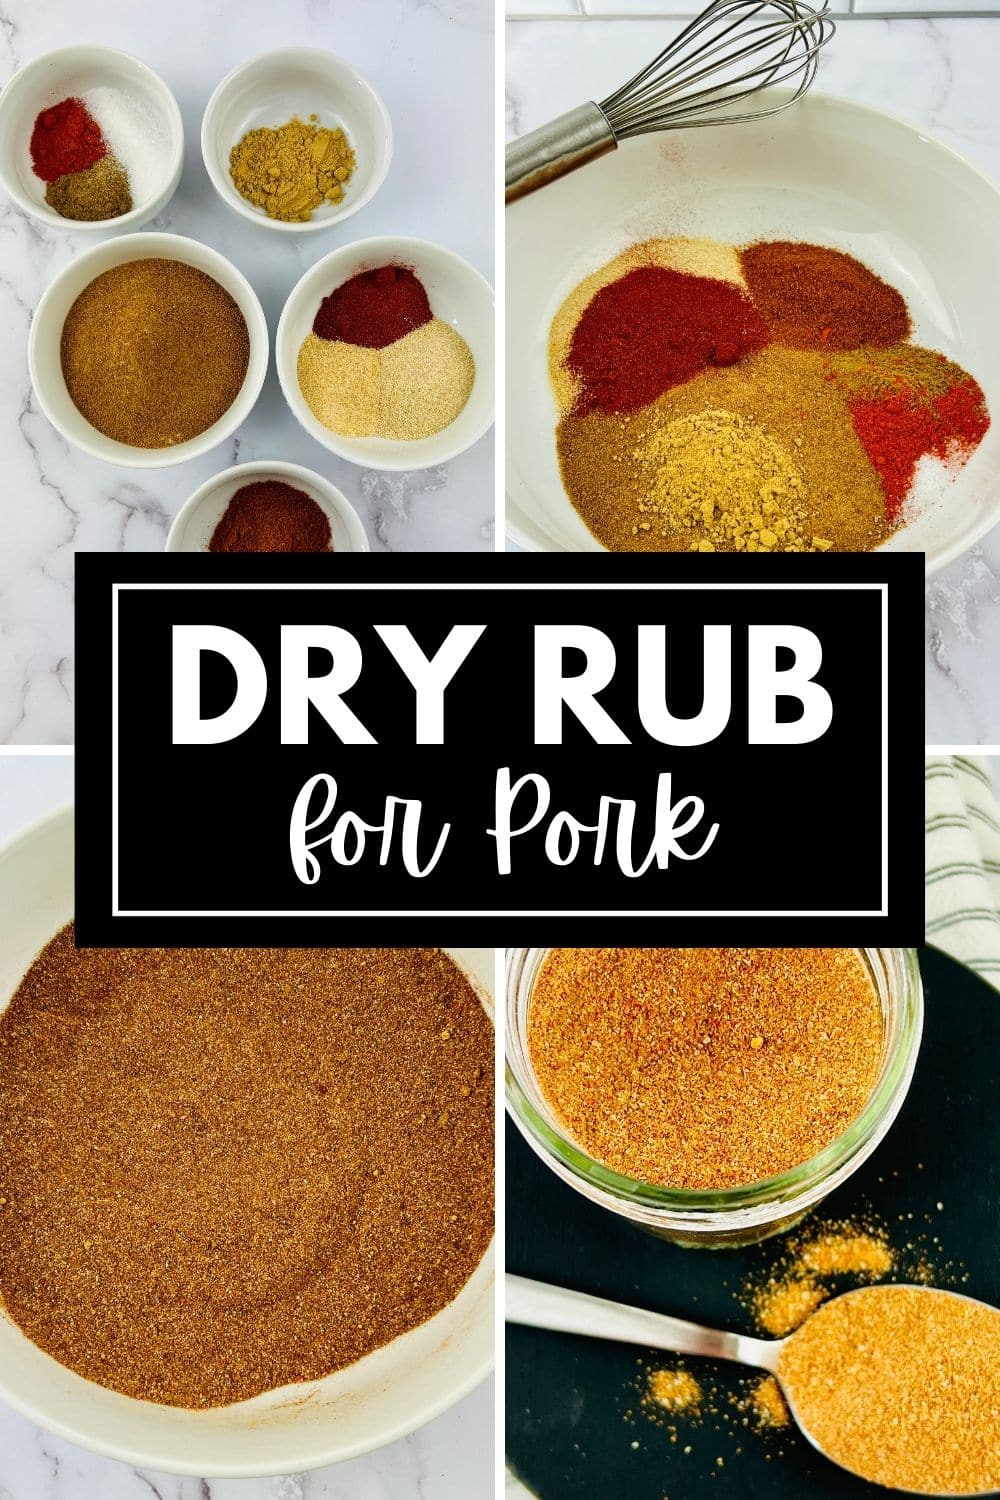 Enhance the flavor of your pork with this delectable dry rub.